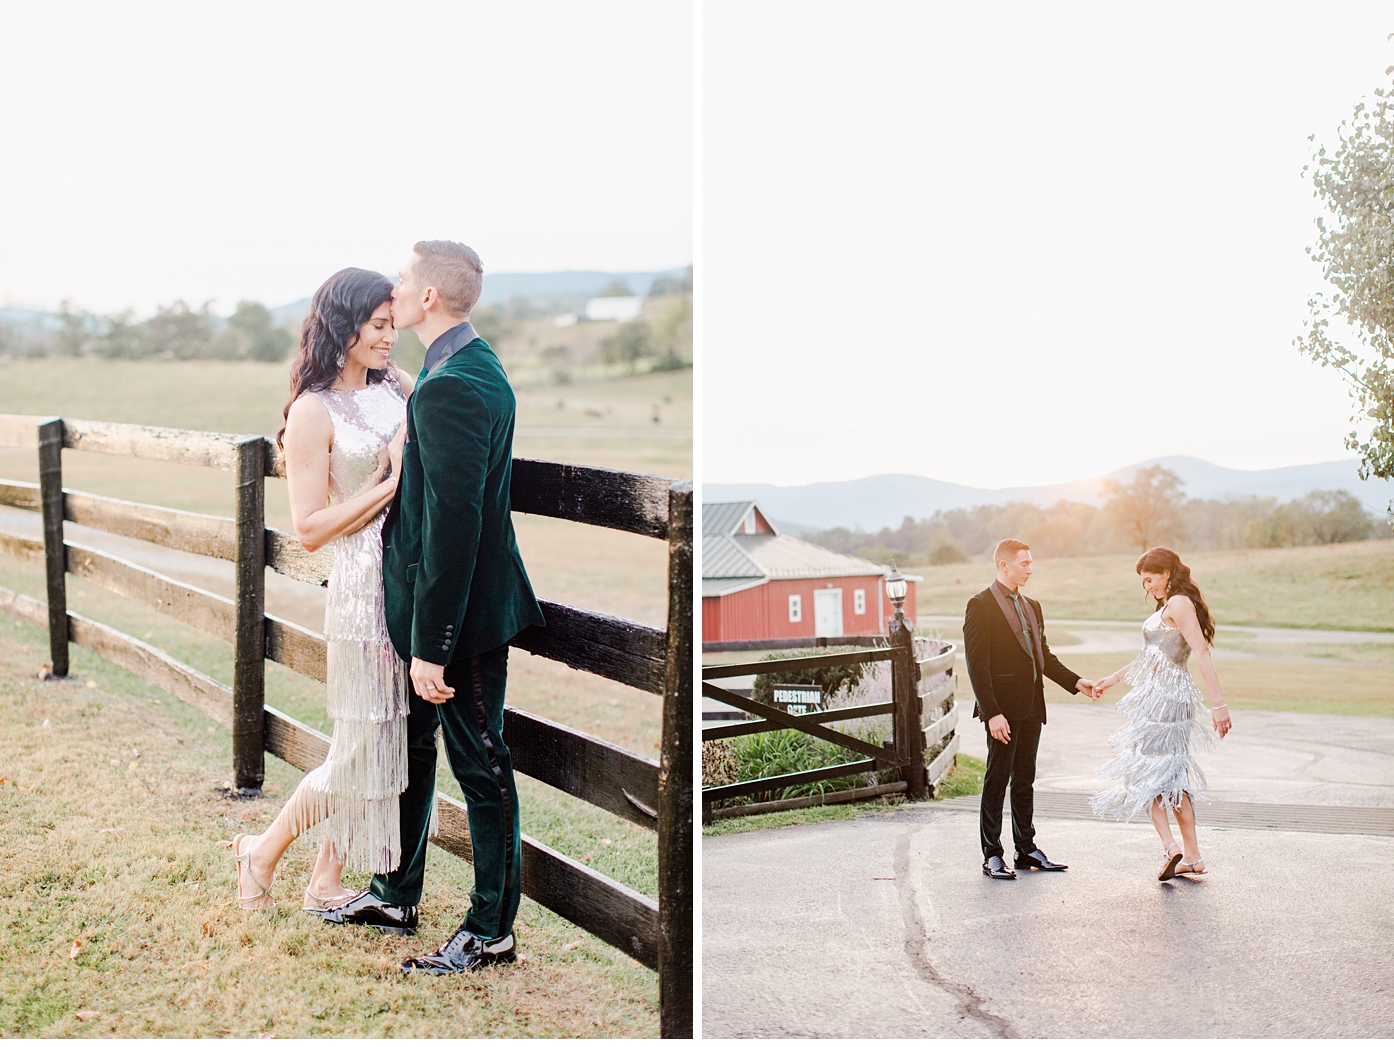 20's Vintage Inspired Wedding at Marriott Ranch in Hume Virginia by Alisandra Photography